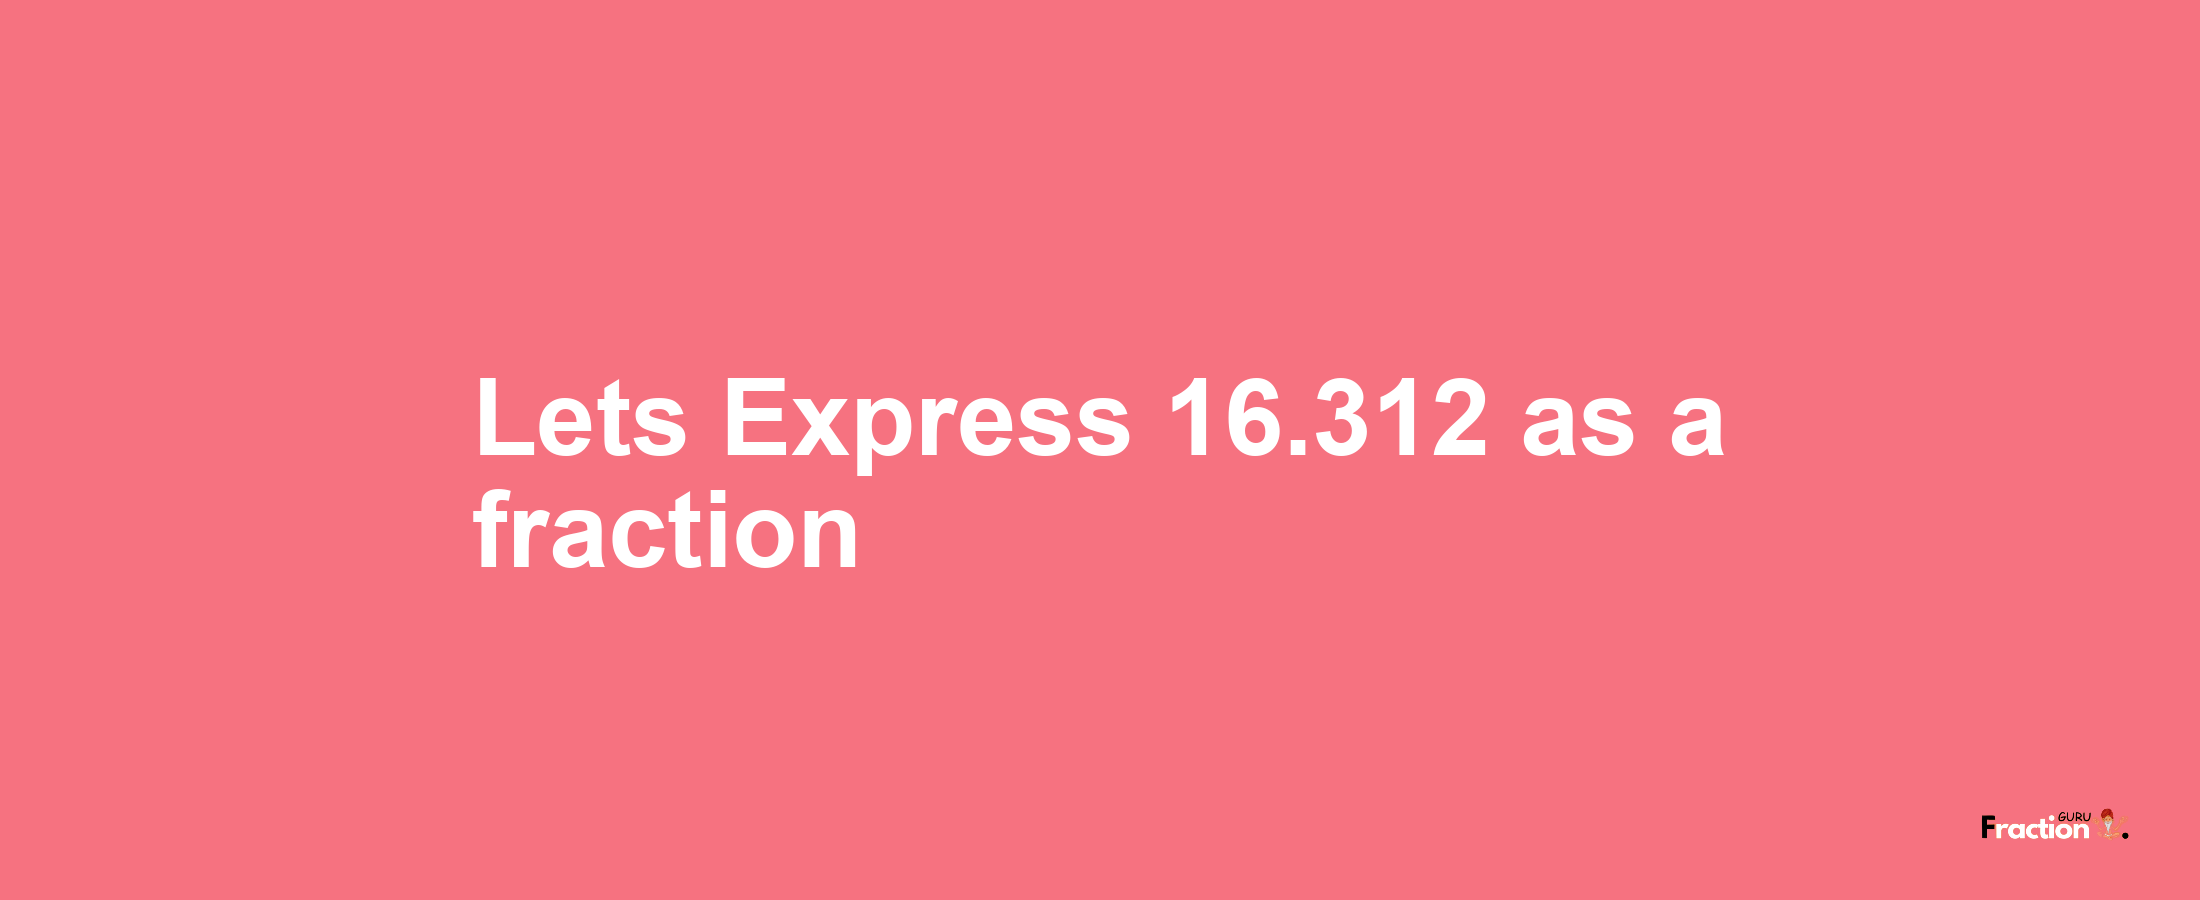 Lets Express 16.312 as afraction